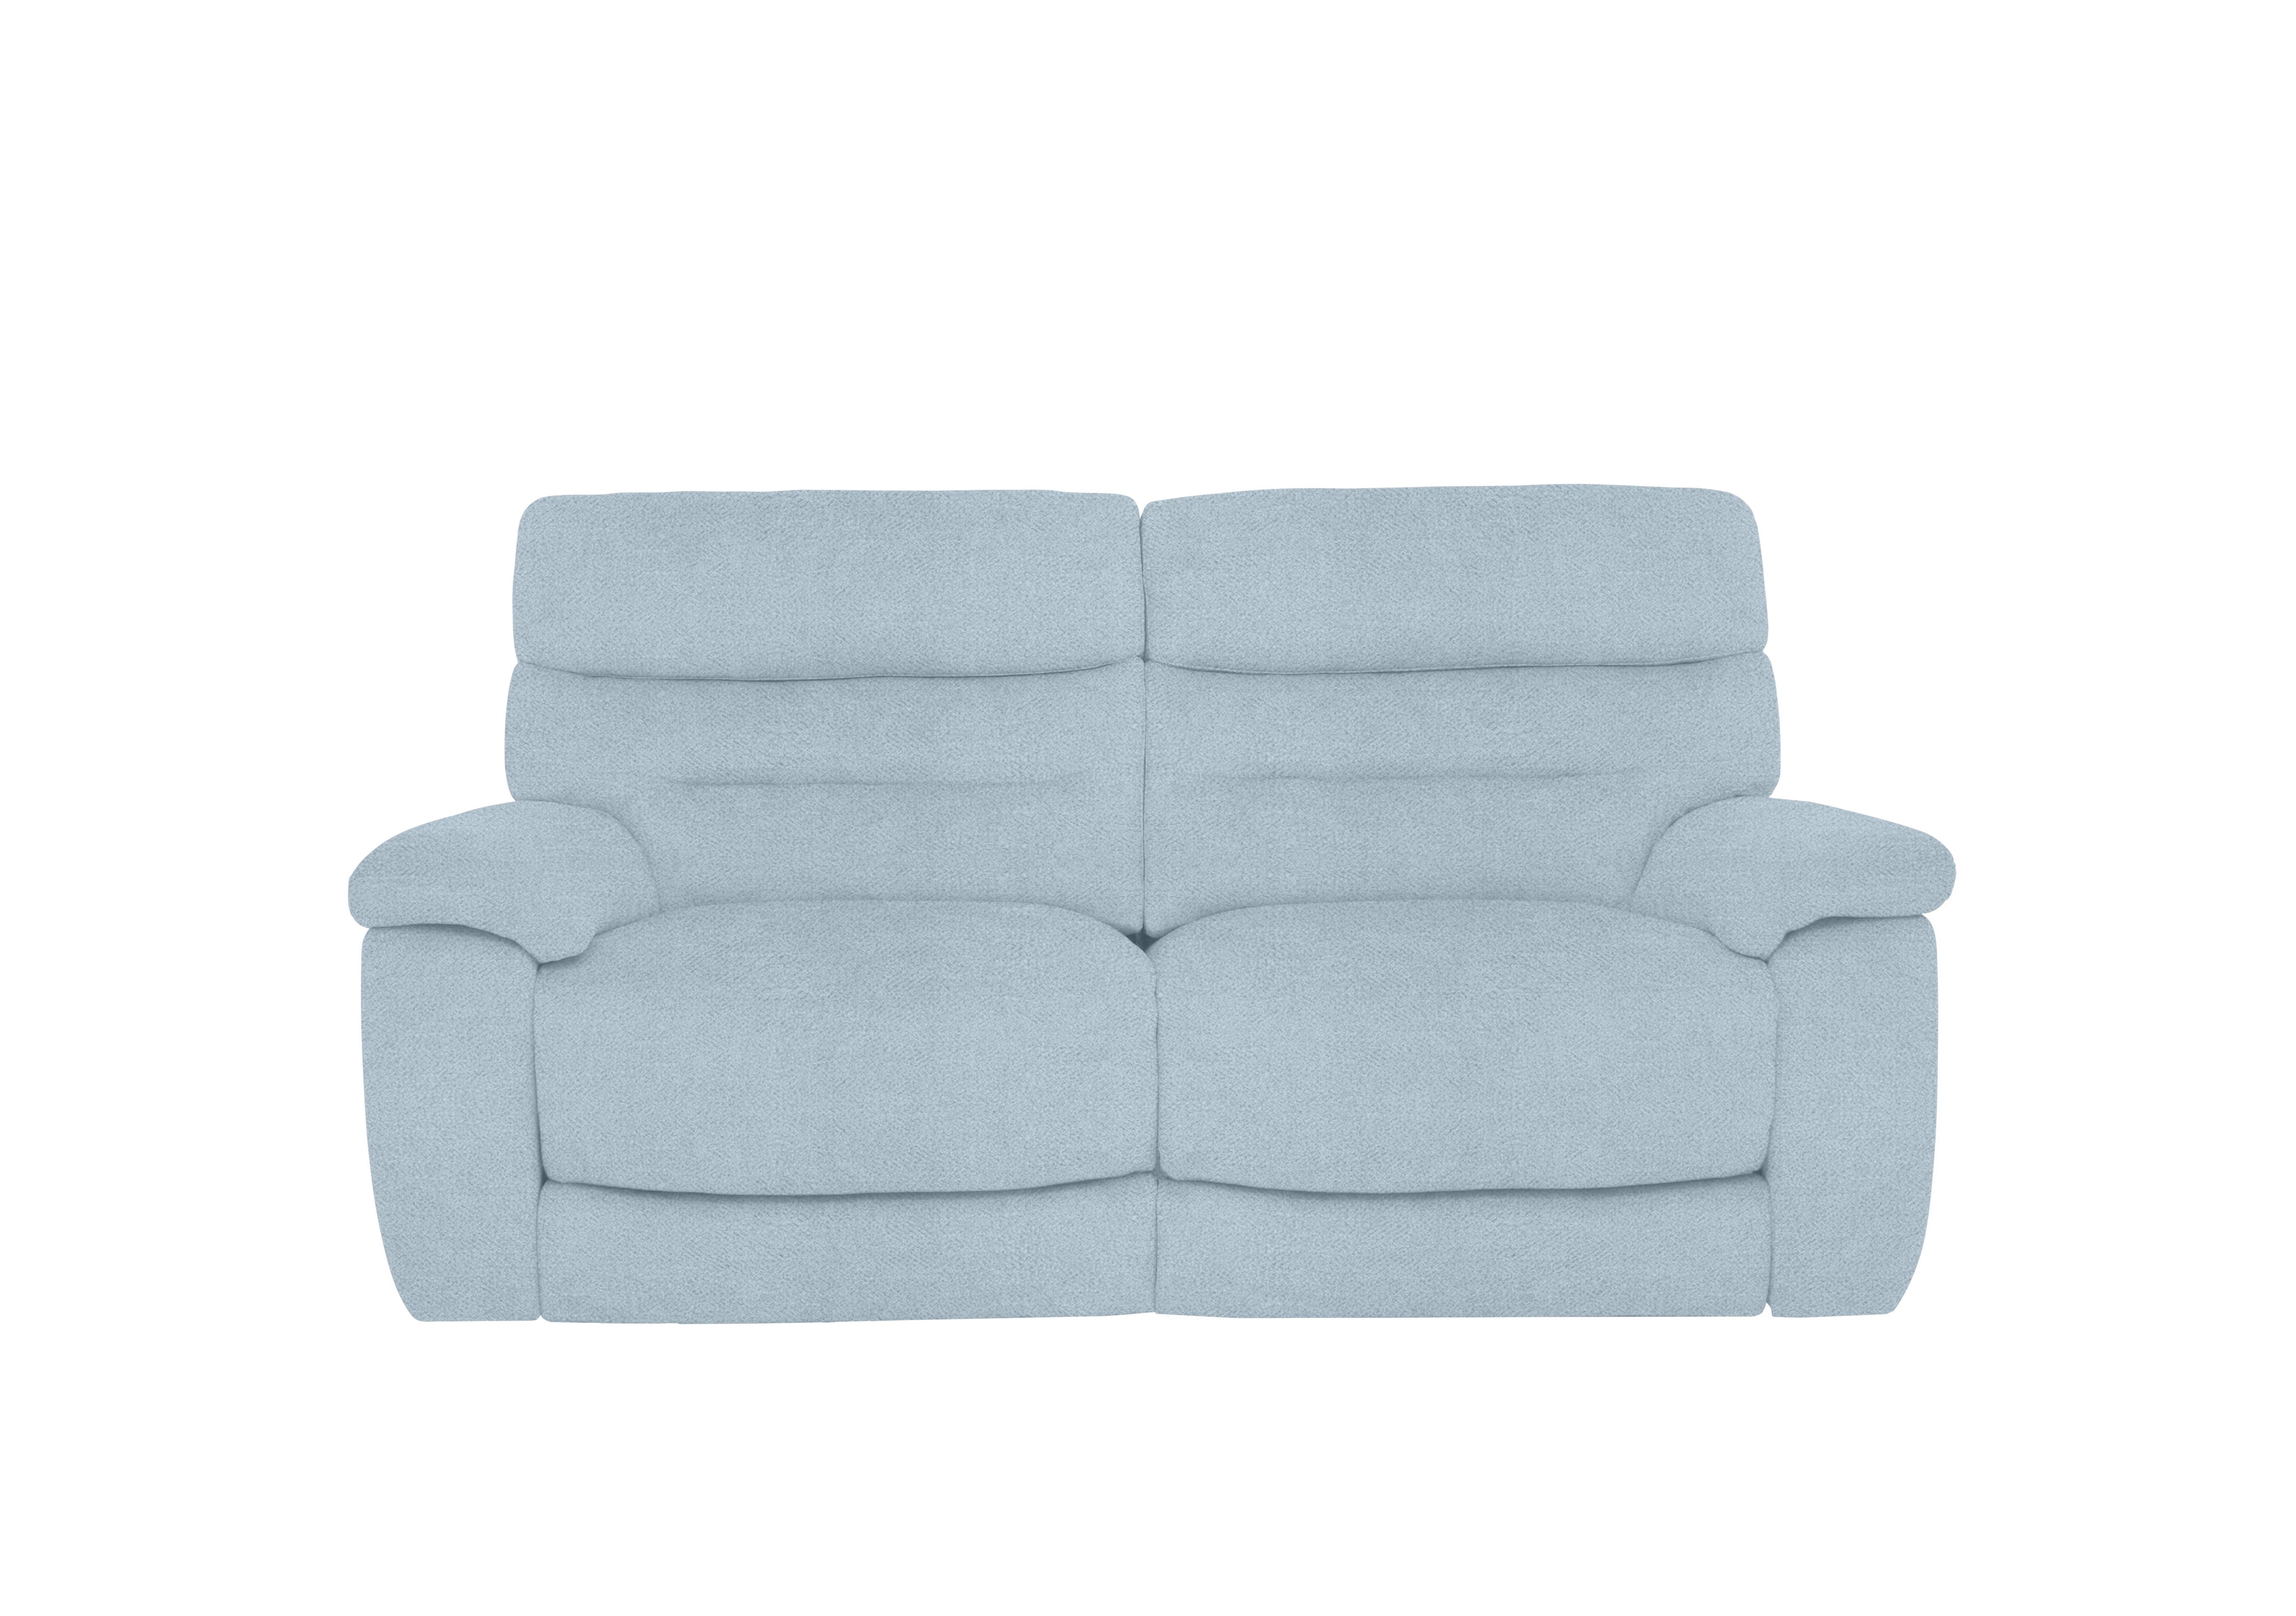 Nimbus 2 Seater Fabric Power Recliner Sofa with Power Headrests and Power Lumbar in Fab-Meo-R17 Baby Blue on Furniture Village